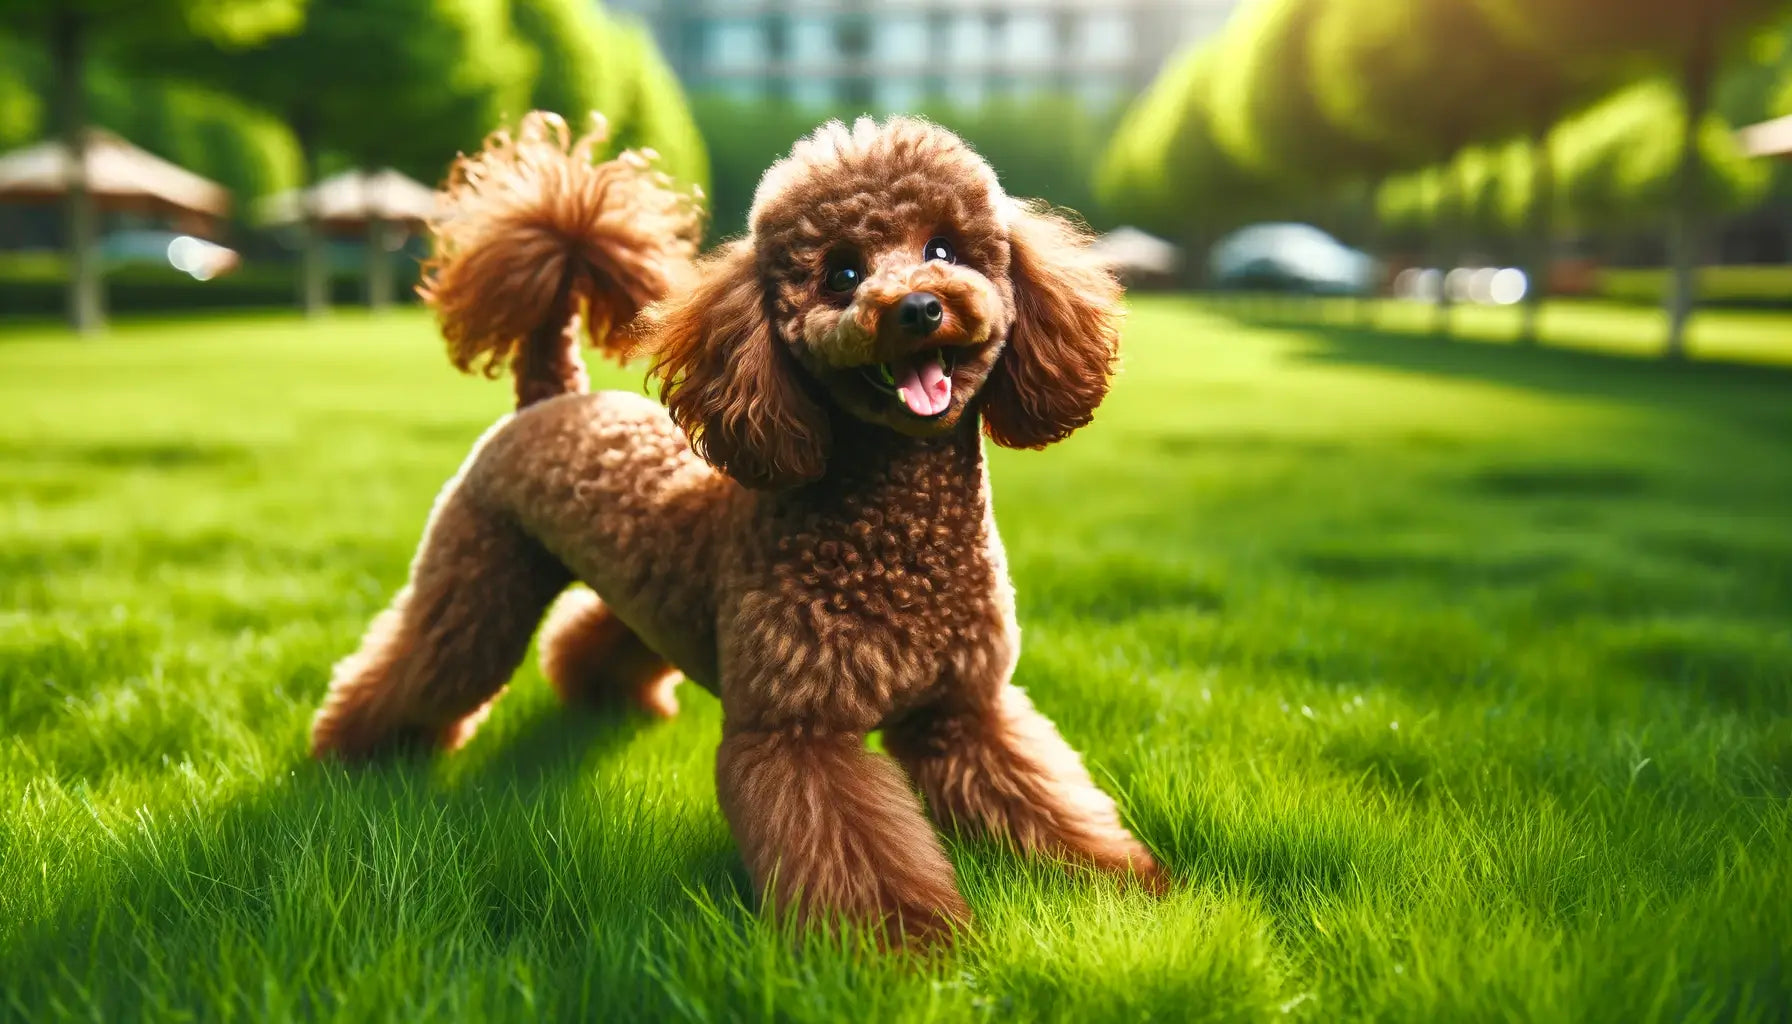 A brown Poodle in a playful stance on grass, appearing joyful and active.